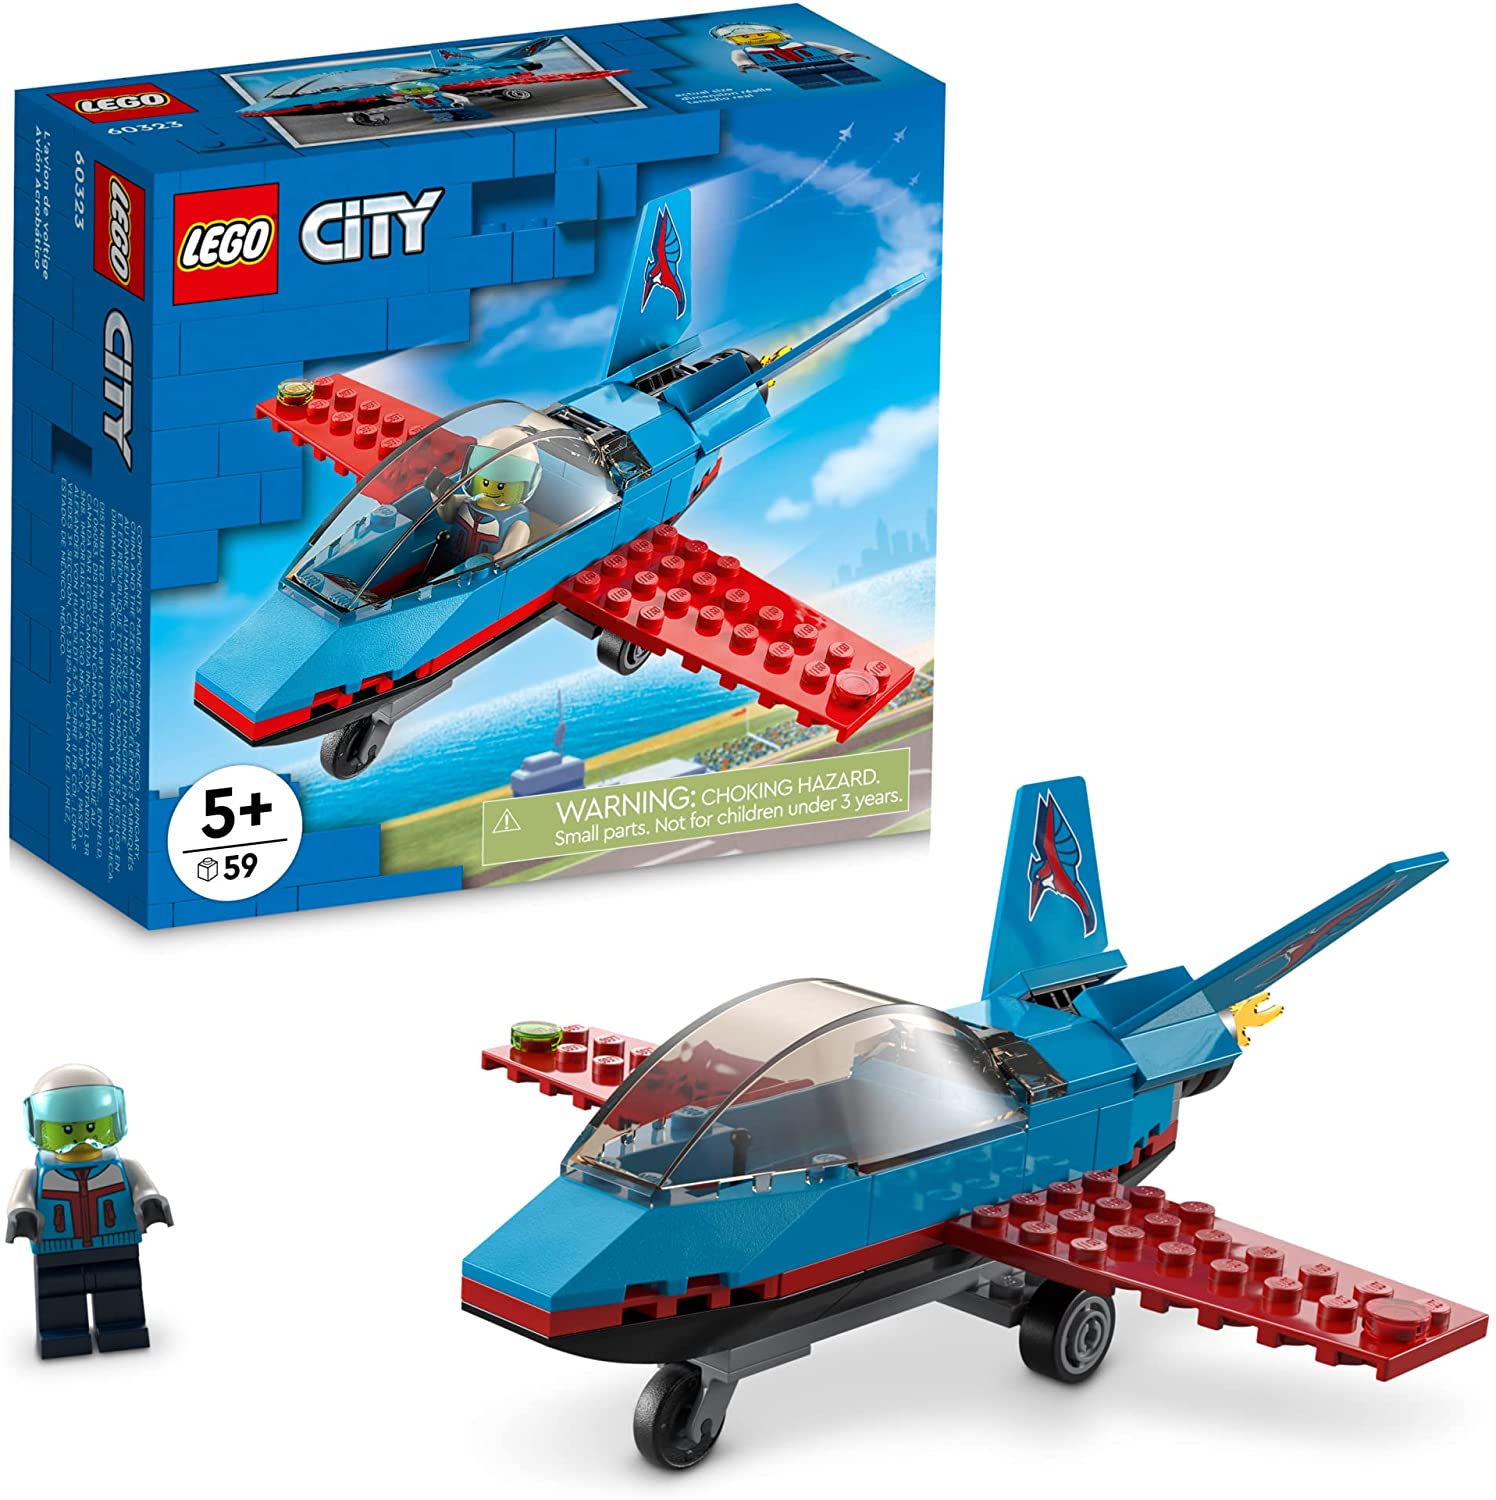 59-Pc LEGO City Stunt Plane Building Kit w/ Decorated Tail Fins, Opening Cockpit & Pilot Minifigure w/ Helmet (60323) $8 & More + FS w/ Amazon Prime or FS on $25+